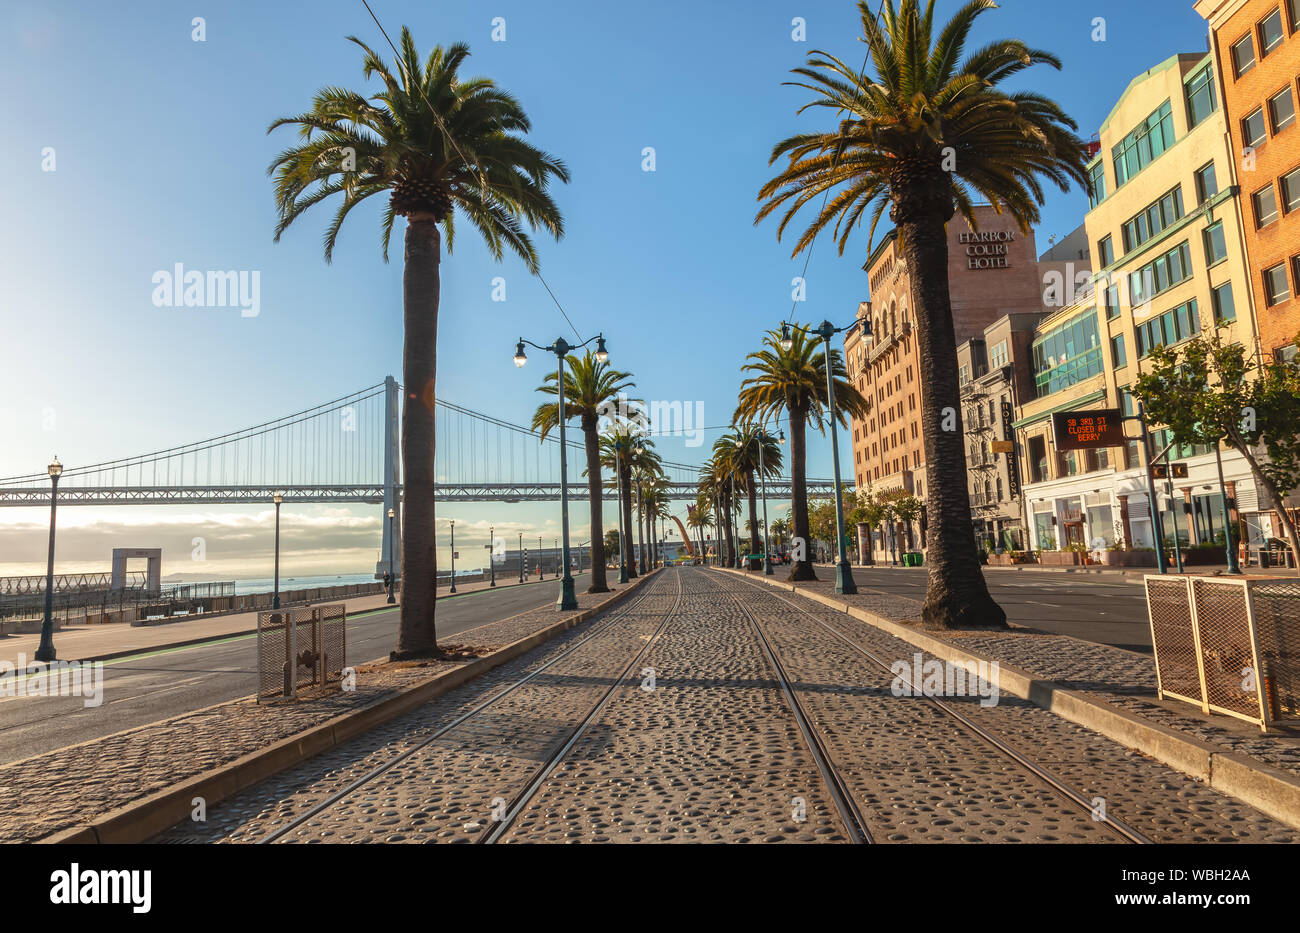 Rail tracks for trolley buses and the landscape of Embarcadero Street in San Francisco, California, USA Stock Photo